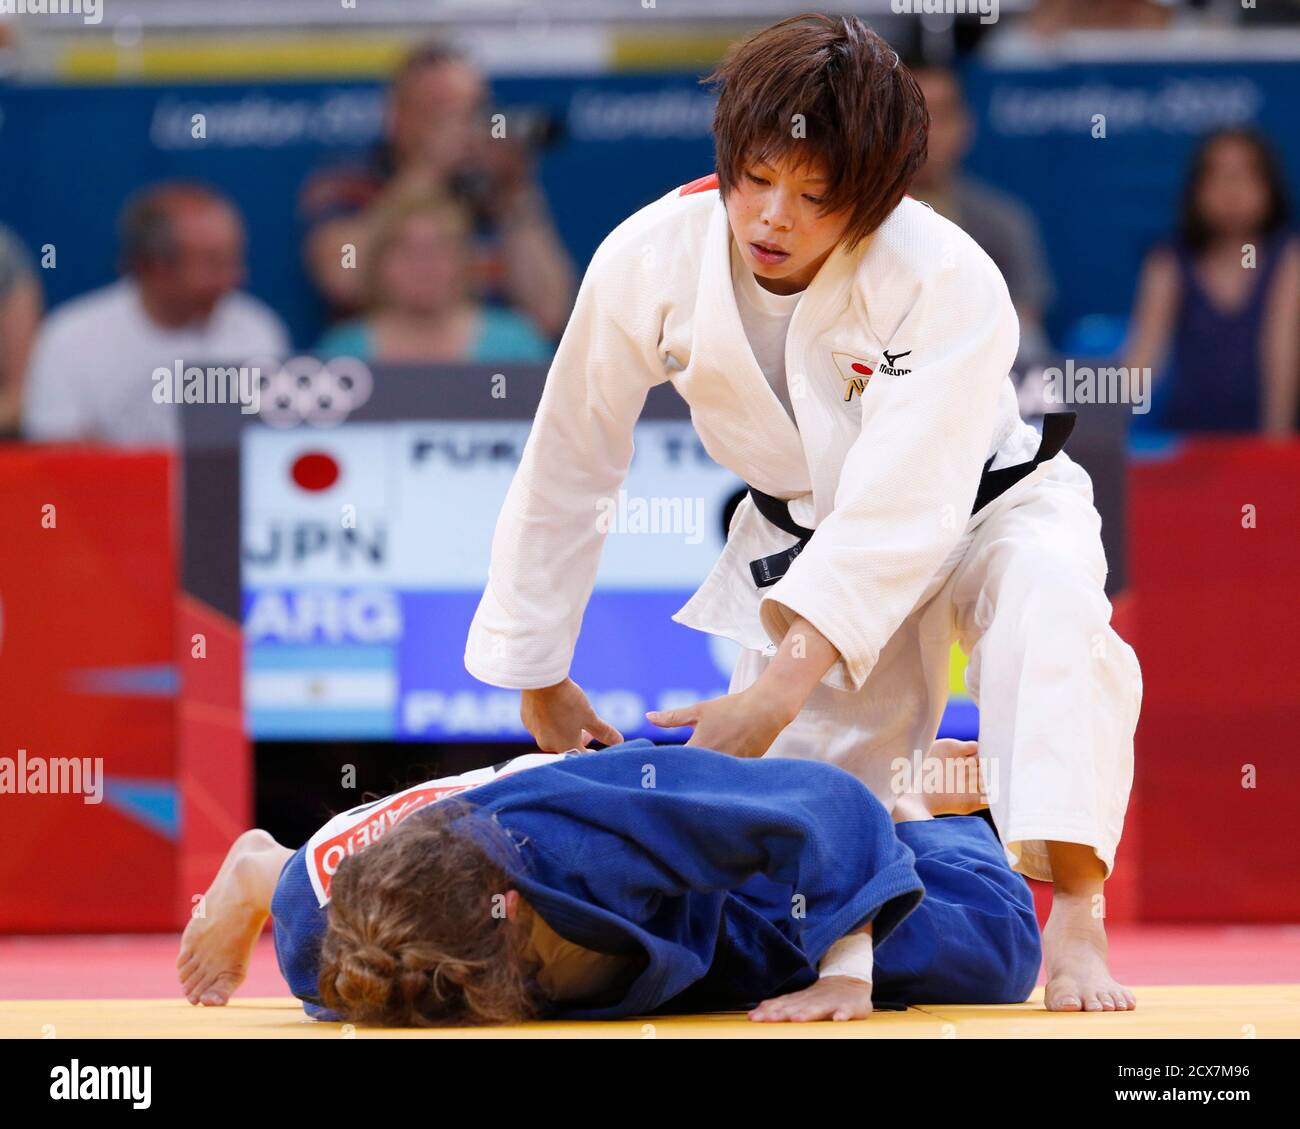 Japan S Tomoko Fukumi Fights With Argentina S Paula Pareto Blue During Their Women S 48kg Quarter Final Judo Match At The London 2012 Olympic Games July 28 2012 Reuters Kim Kyung Hoon Britain Tags Sport Olympics